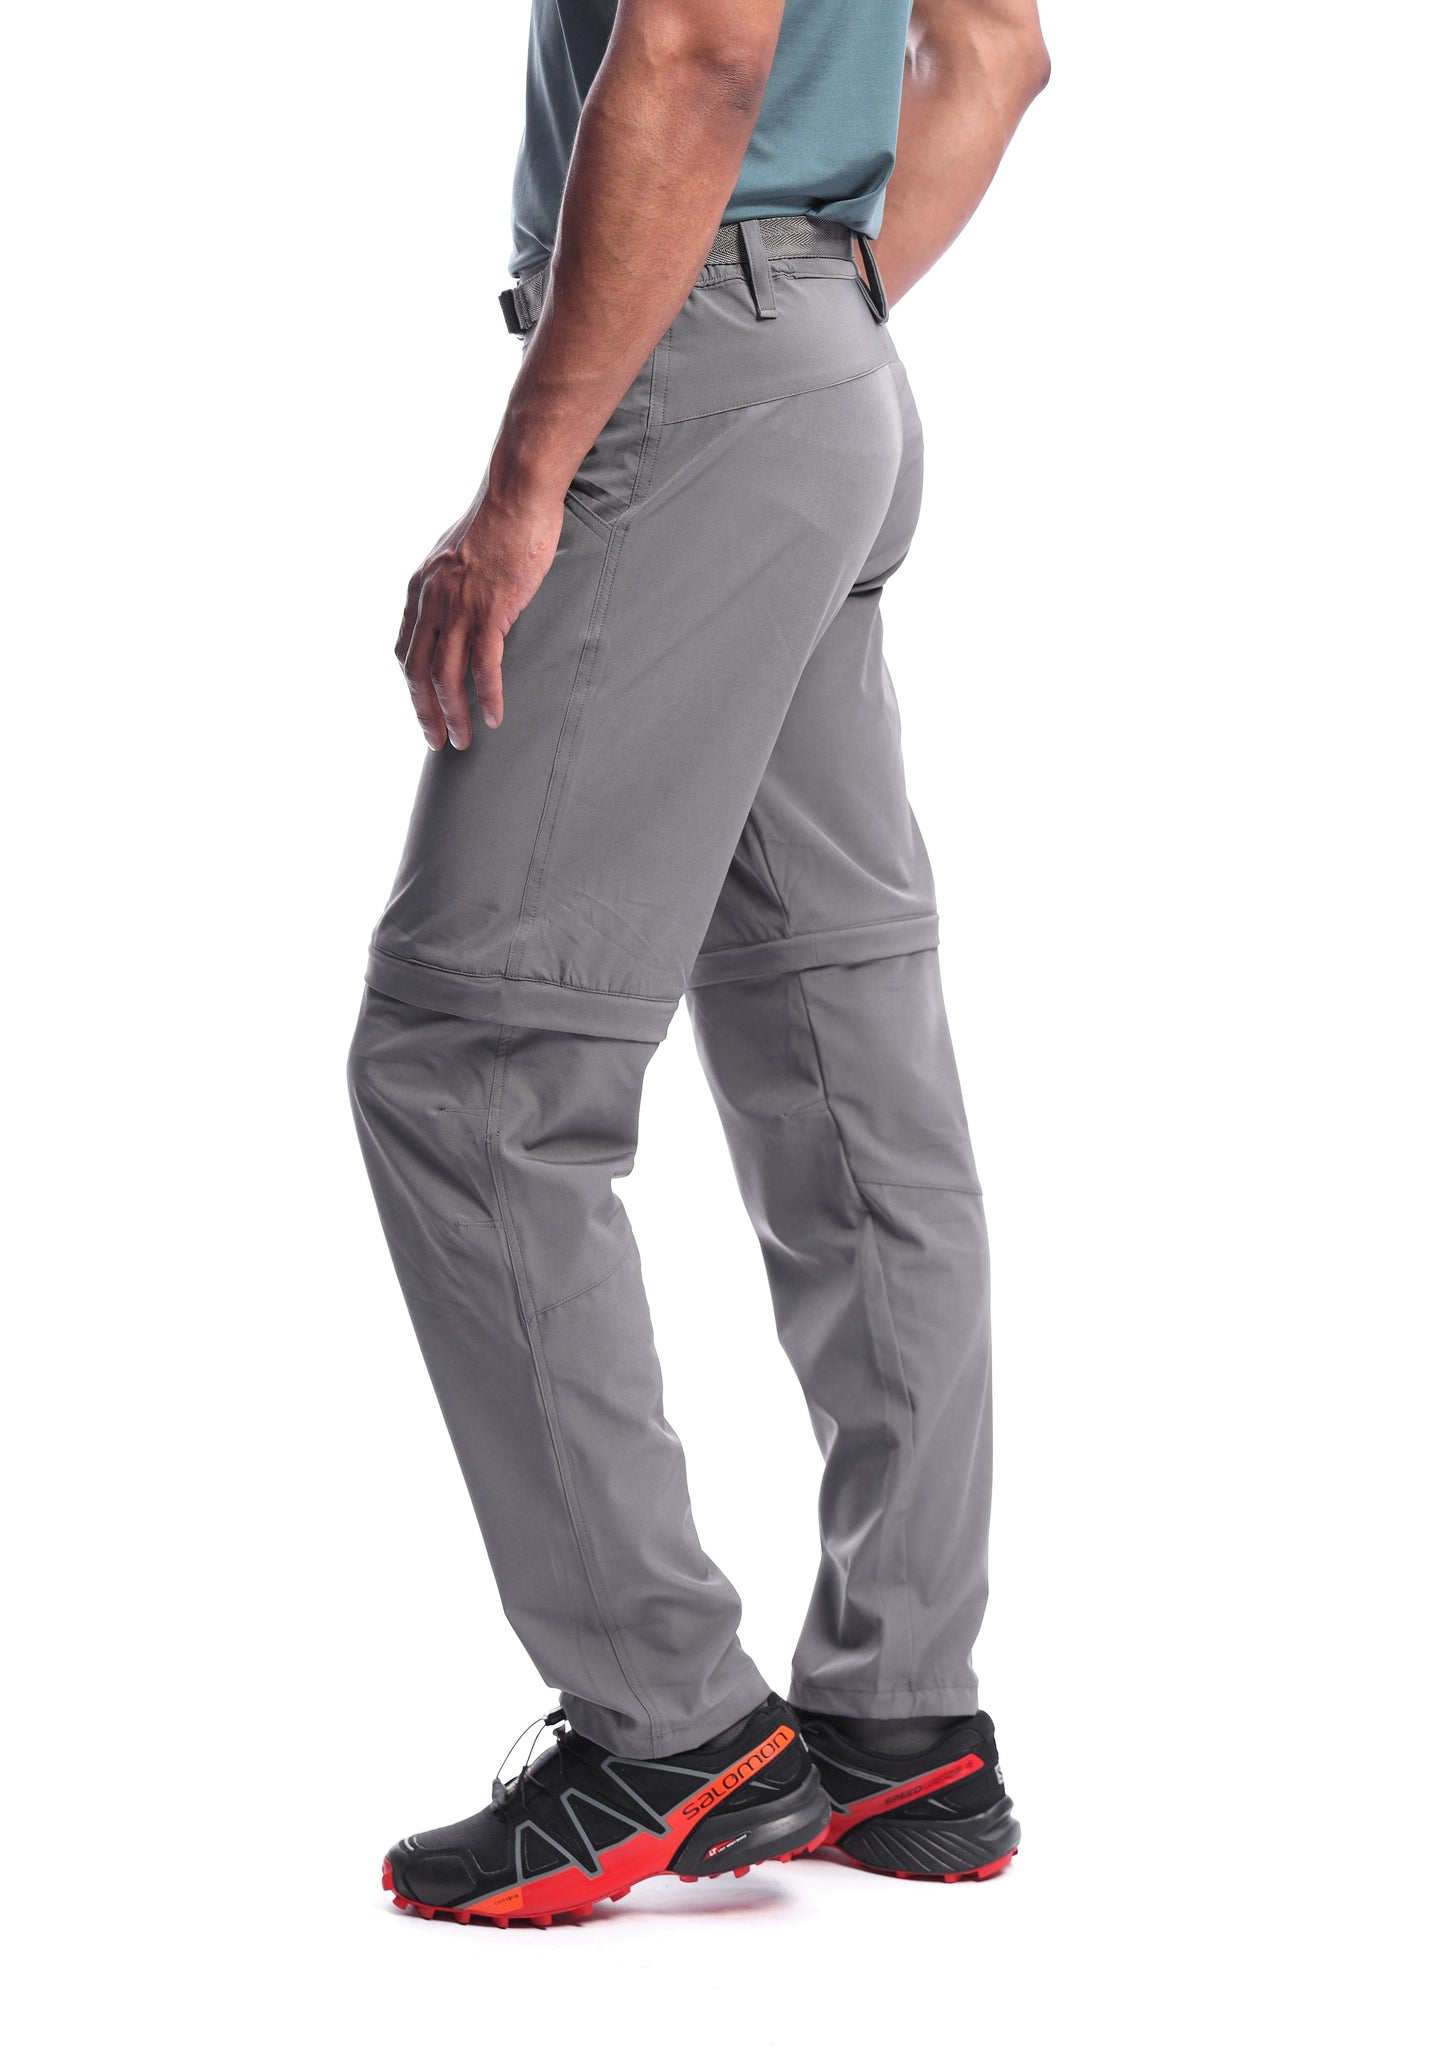 At Last the Perfect Hiking Pants for Curvy Women